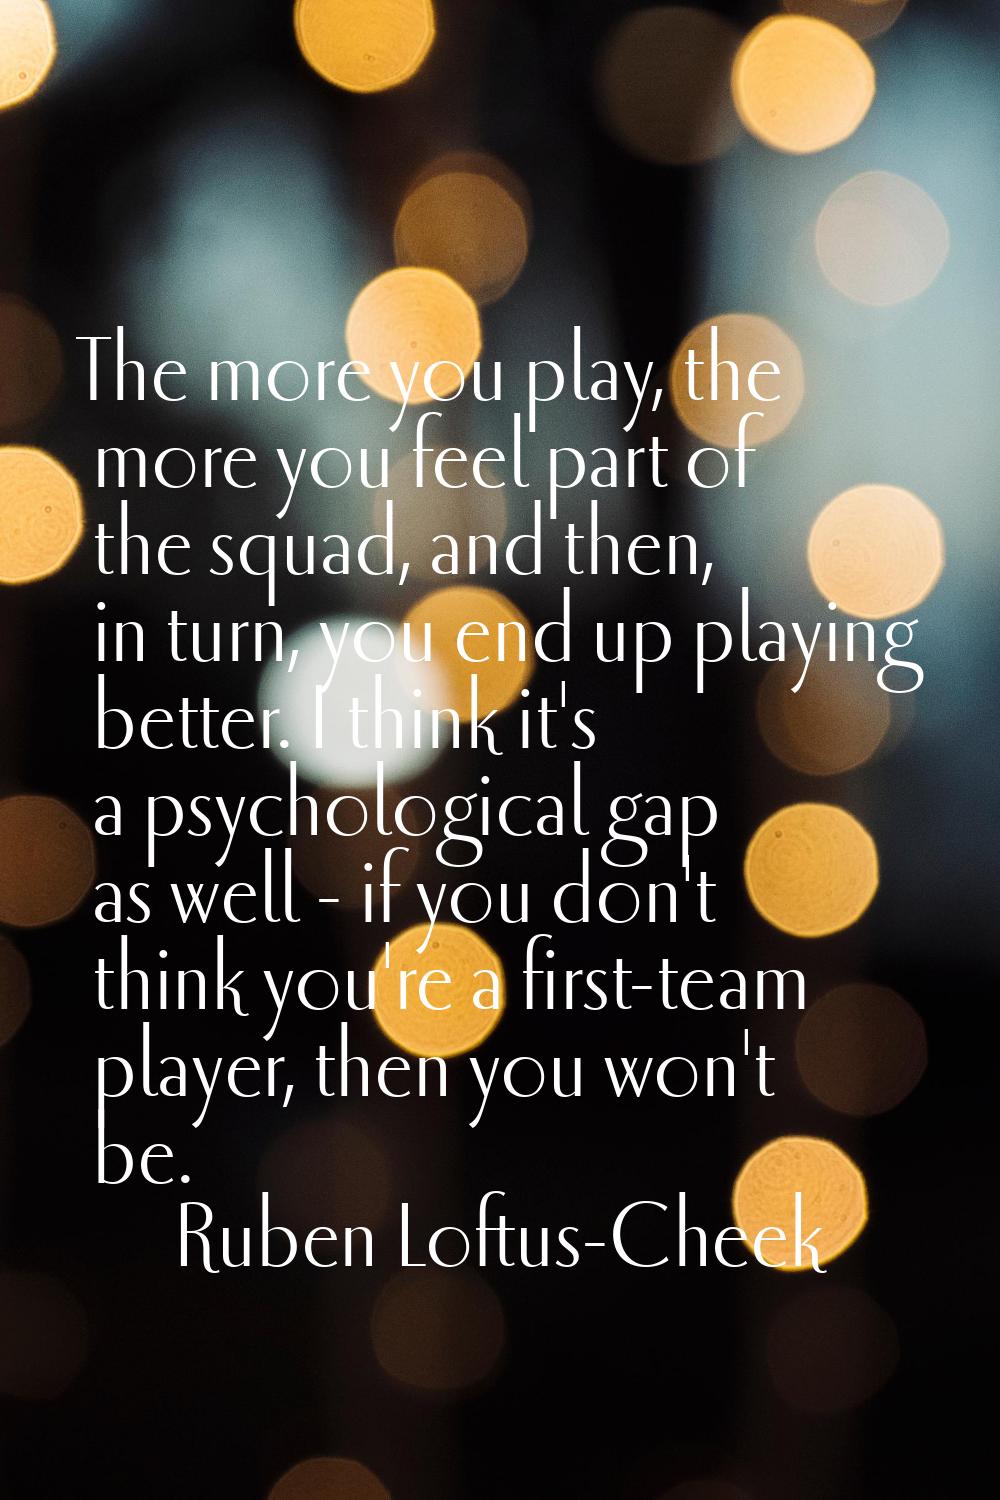 The more you play, the more you feel part of the squad, and then, in turn, you end up playing bette